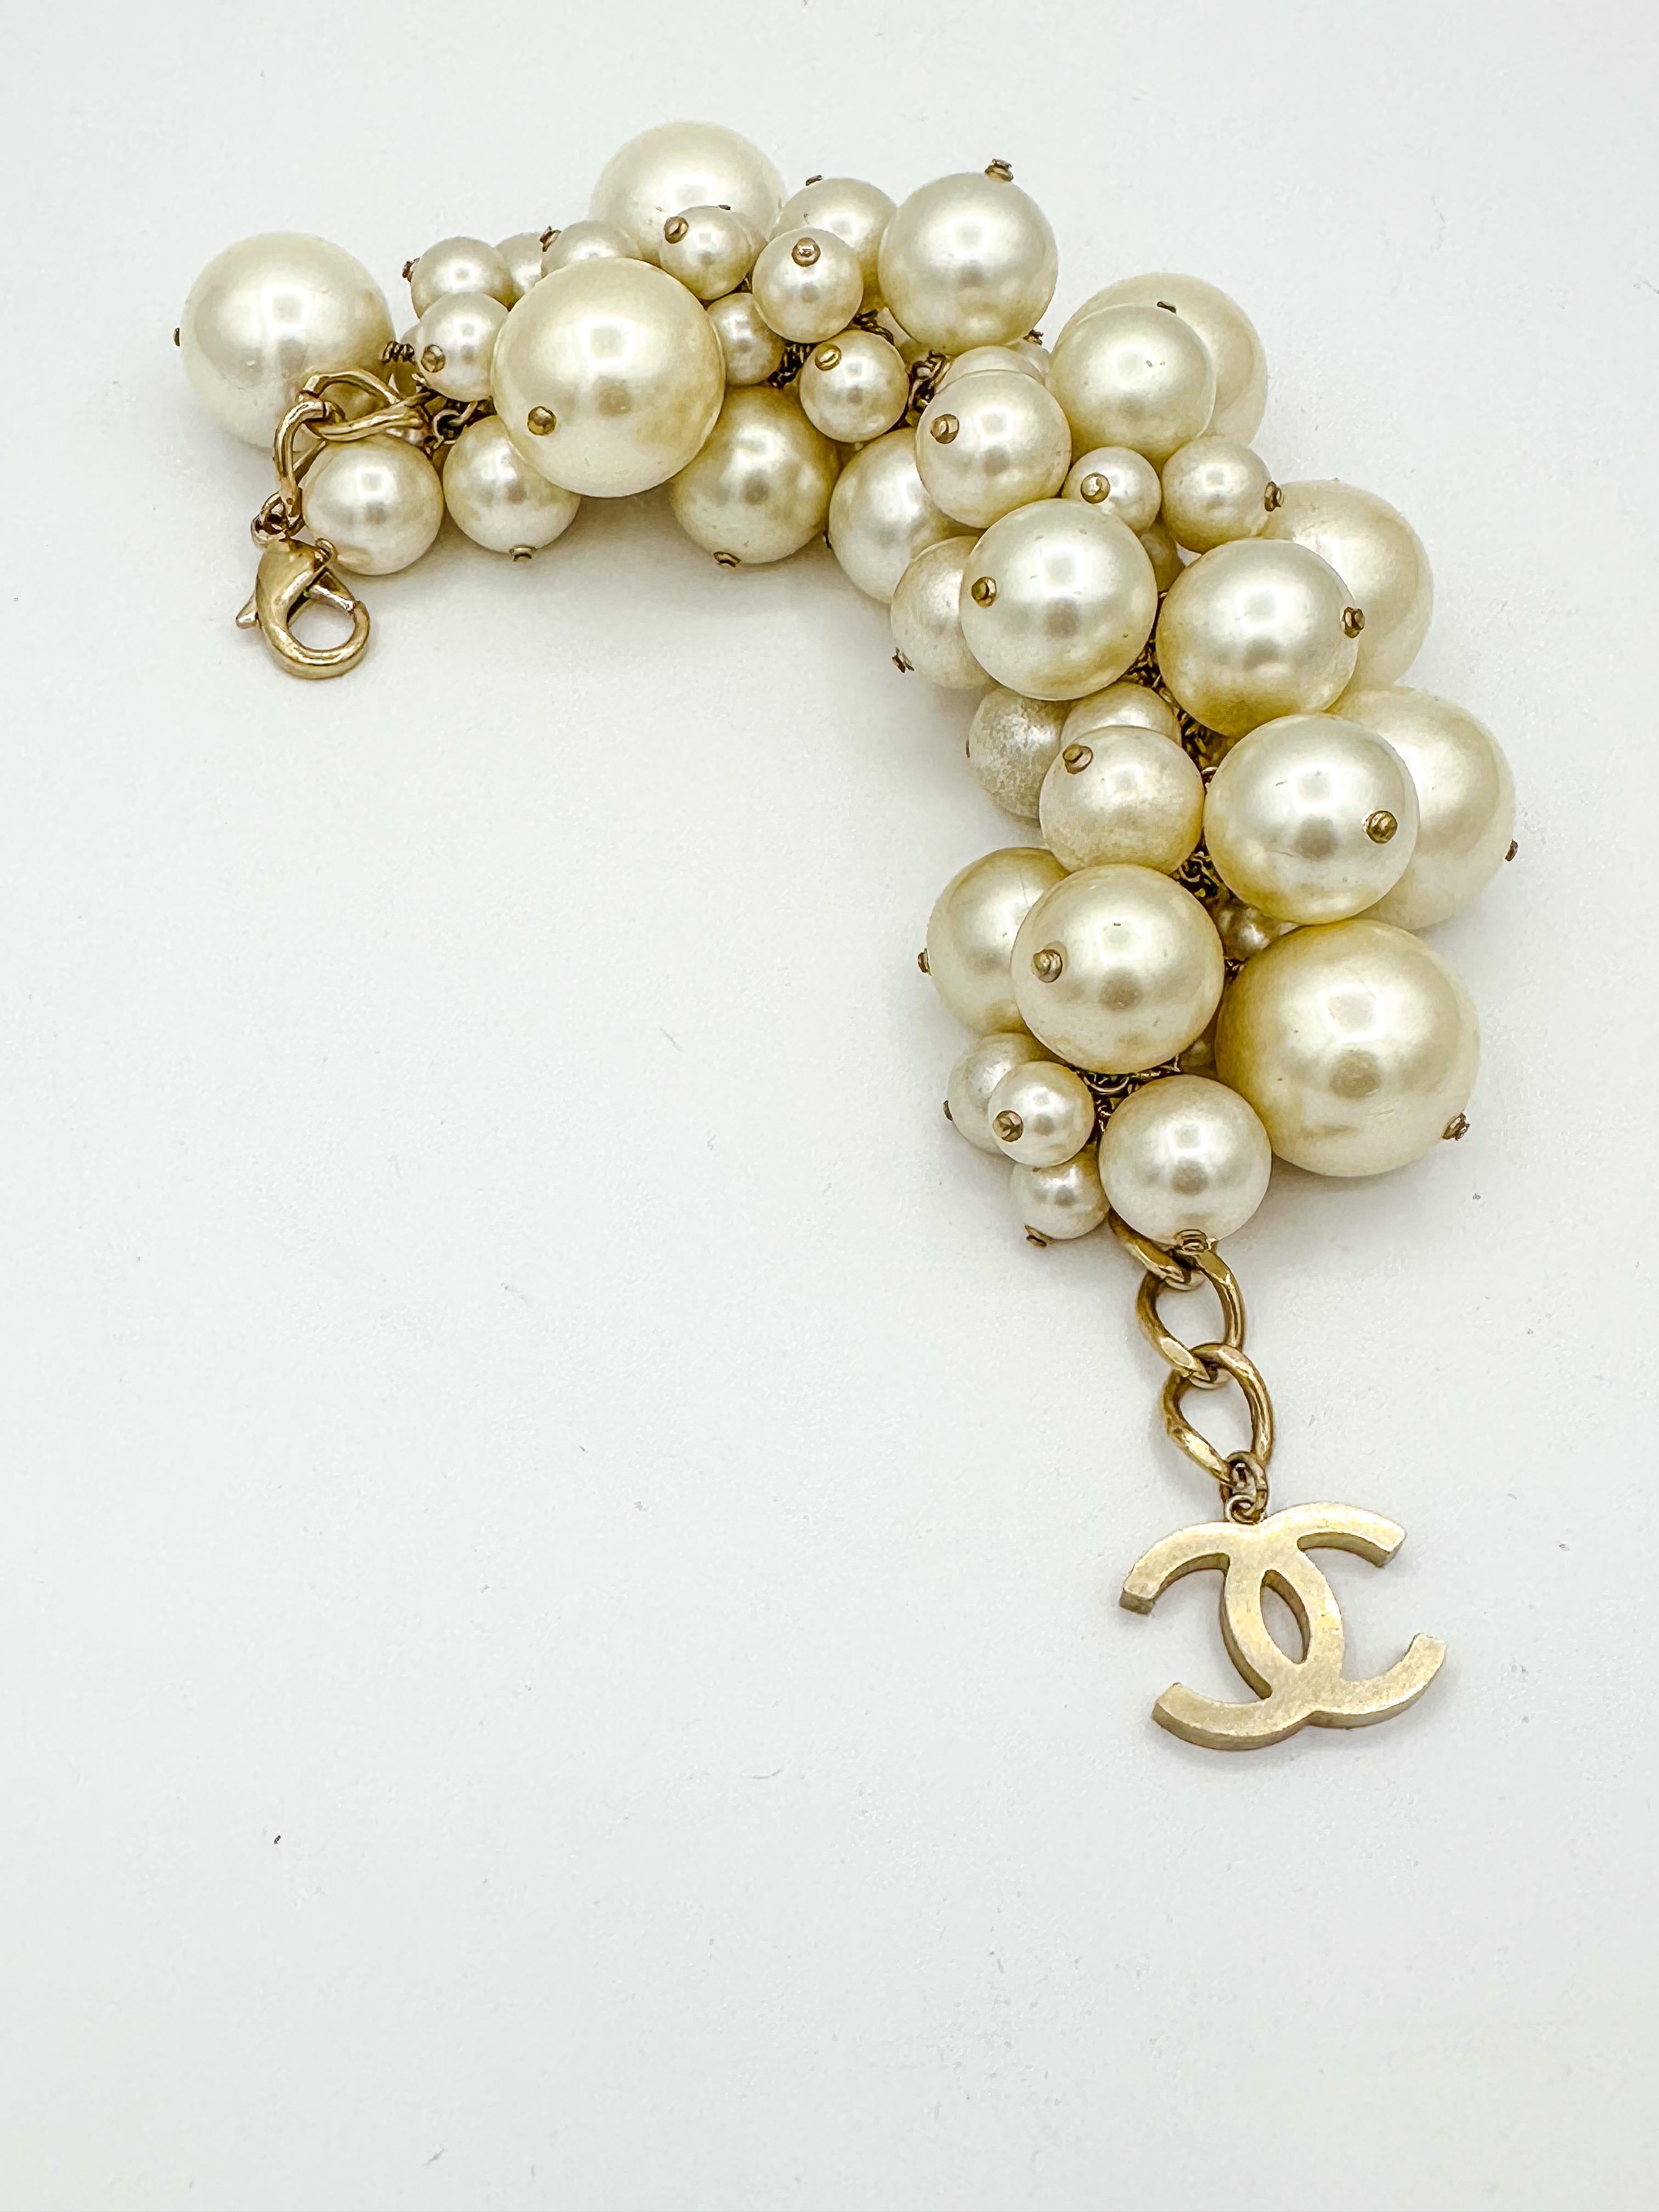 Oversize Chanel Spring 2013 Runway Pearl Cluster Bracelet.  Brushed Gold-tone Metal Chain Link with Pearls Varying in Size; Iconic CC Logo Charm 

Measurement Length: 28cm
The size of the pearls varies from 25 mm in diameter 1 pearl, 2 pearls in 24